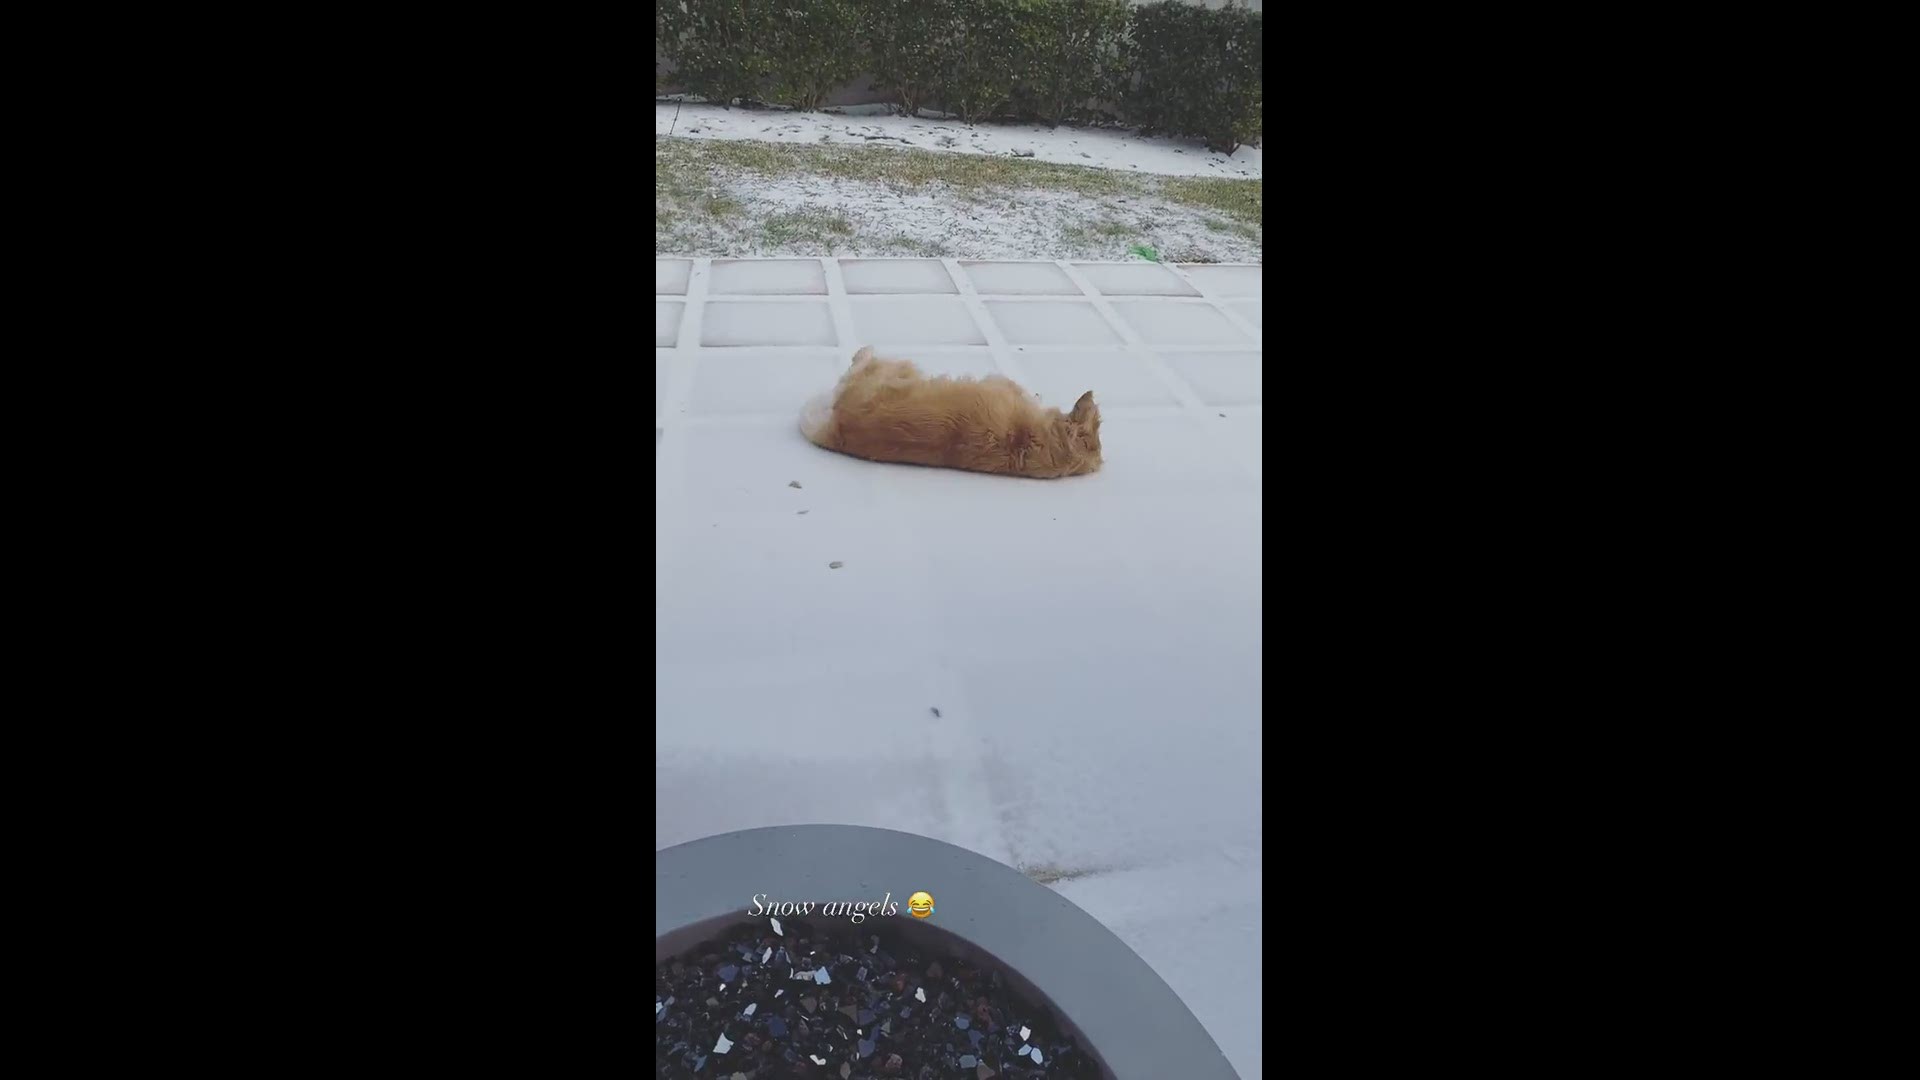 Karsyn sent us this video of her pup doing snow angels in League City!
Credit: Karsyn